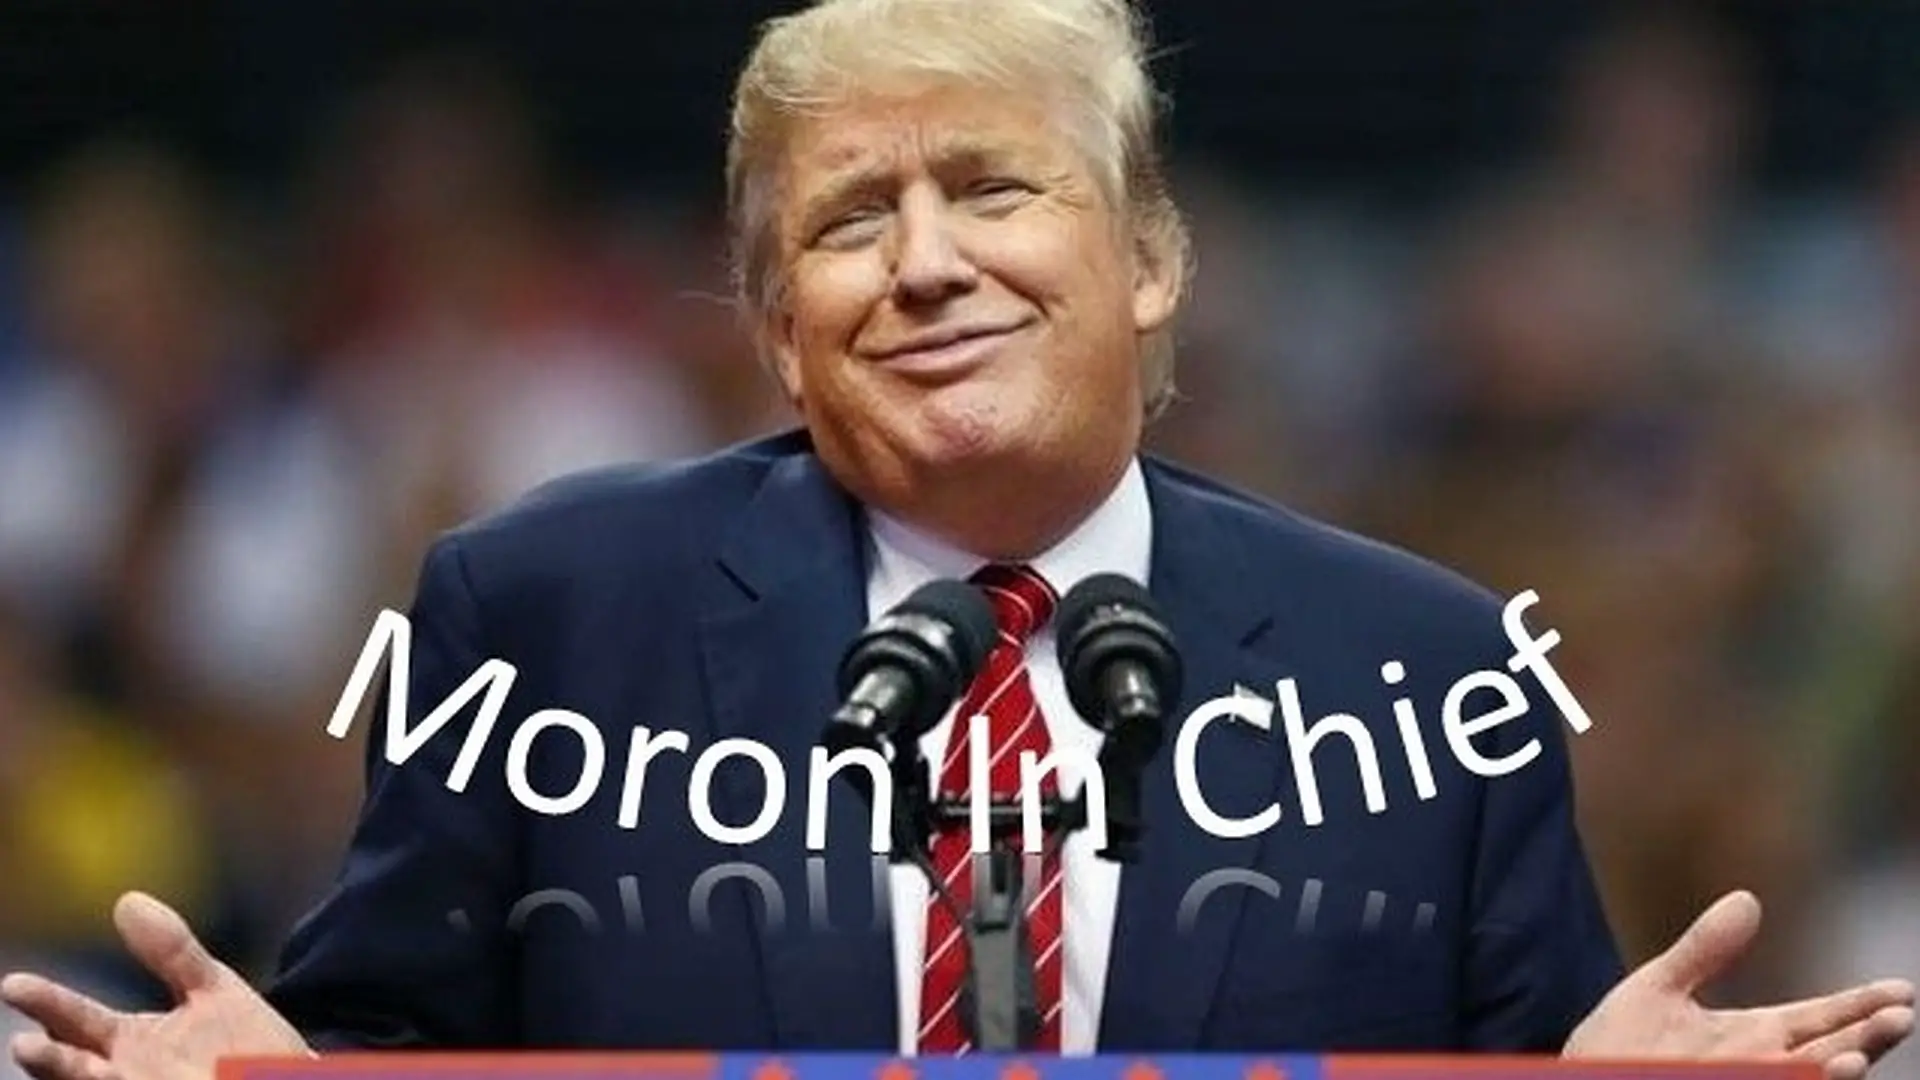 Is Donald Trump A Moron?